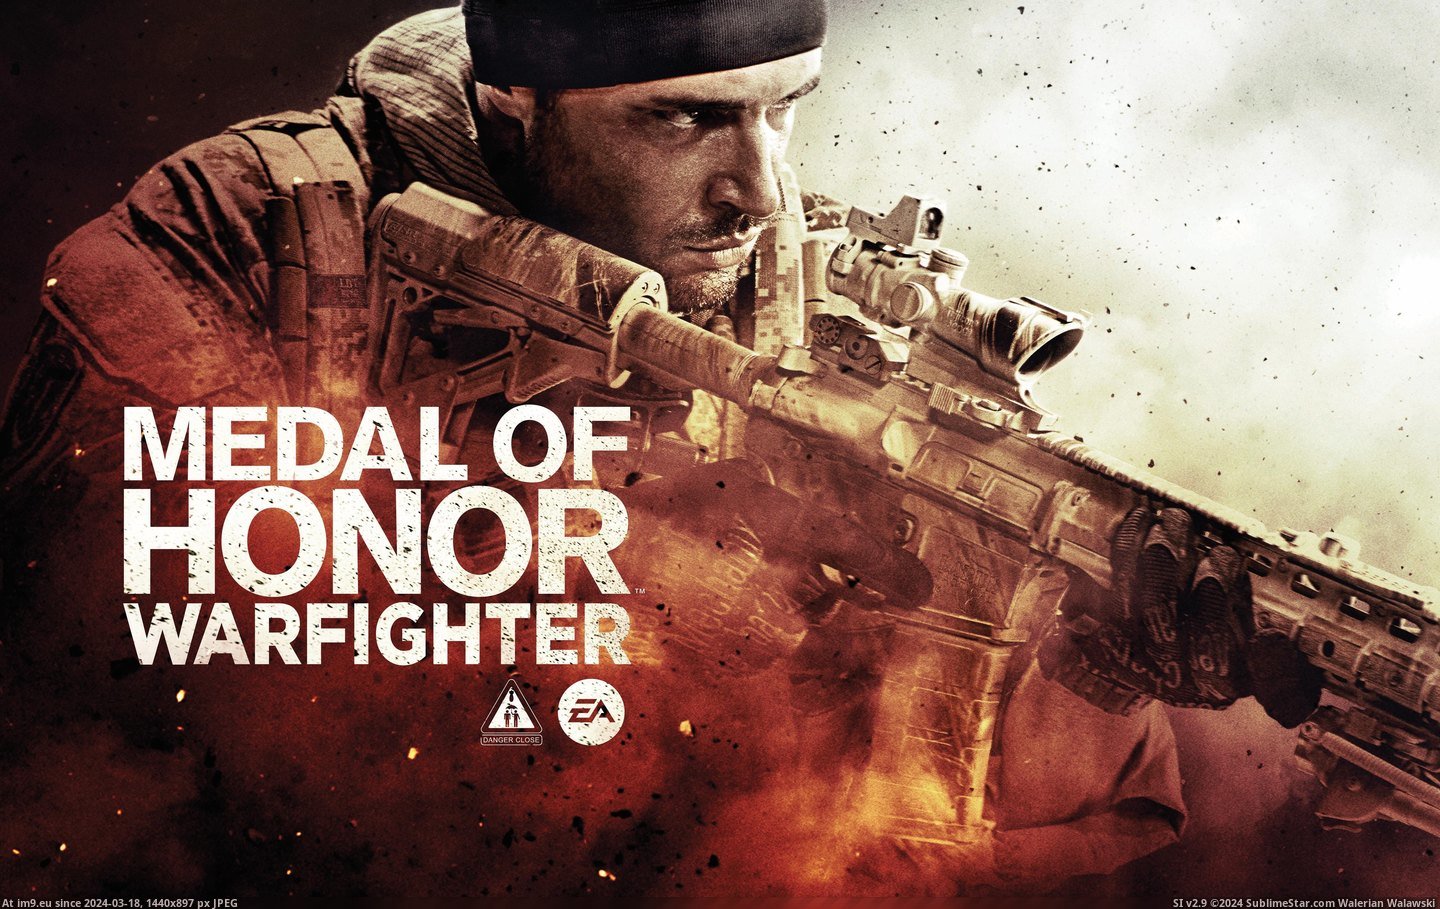 #Wallpaper #Wide #Warfighter #Honor #Medal Medal Of Honor Warfighter Wide HD Wallpaper Pic. (Bild von album Unique HD Wallpapers))